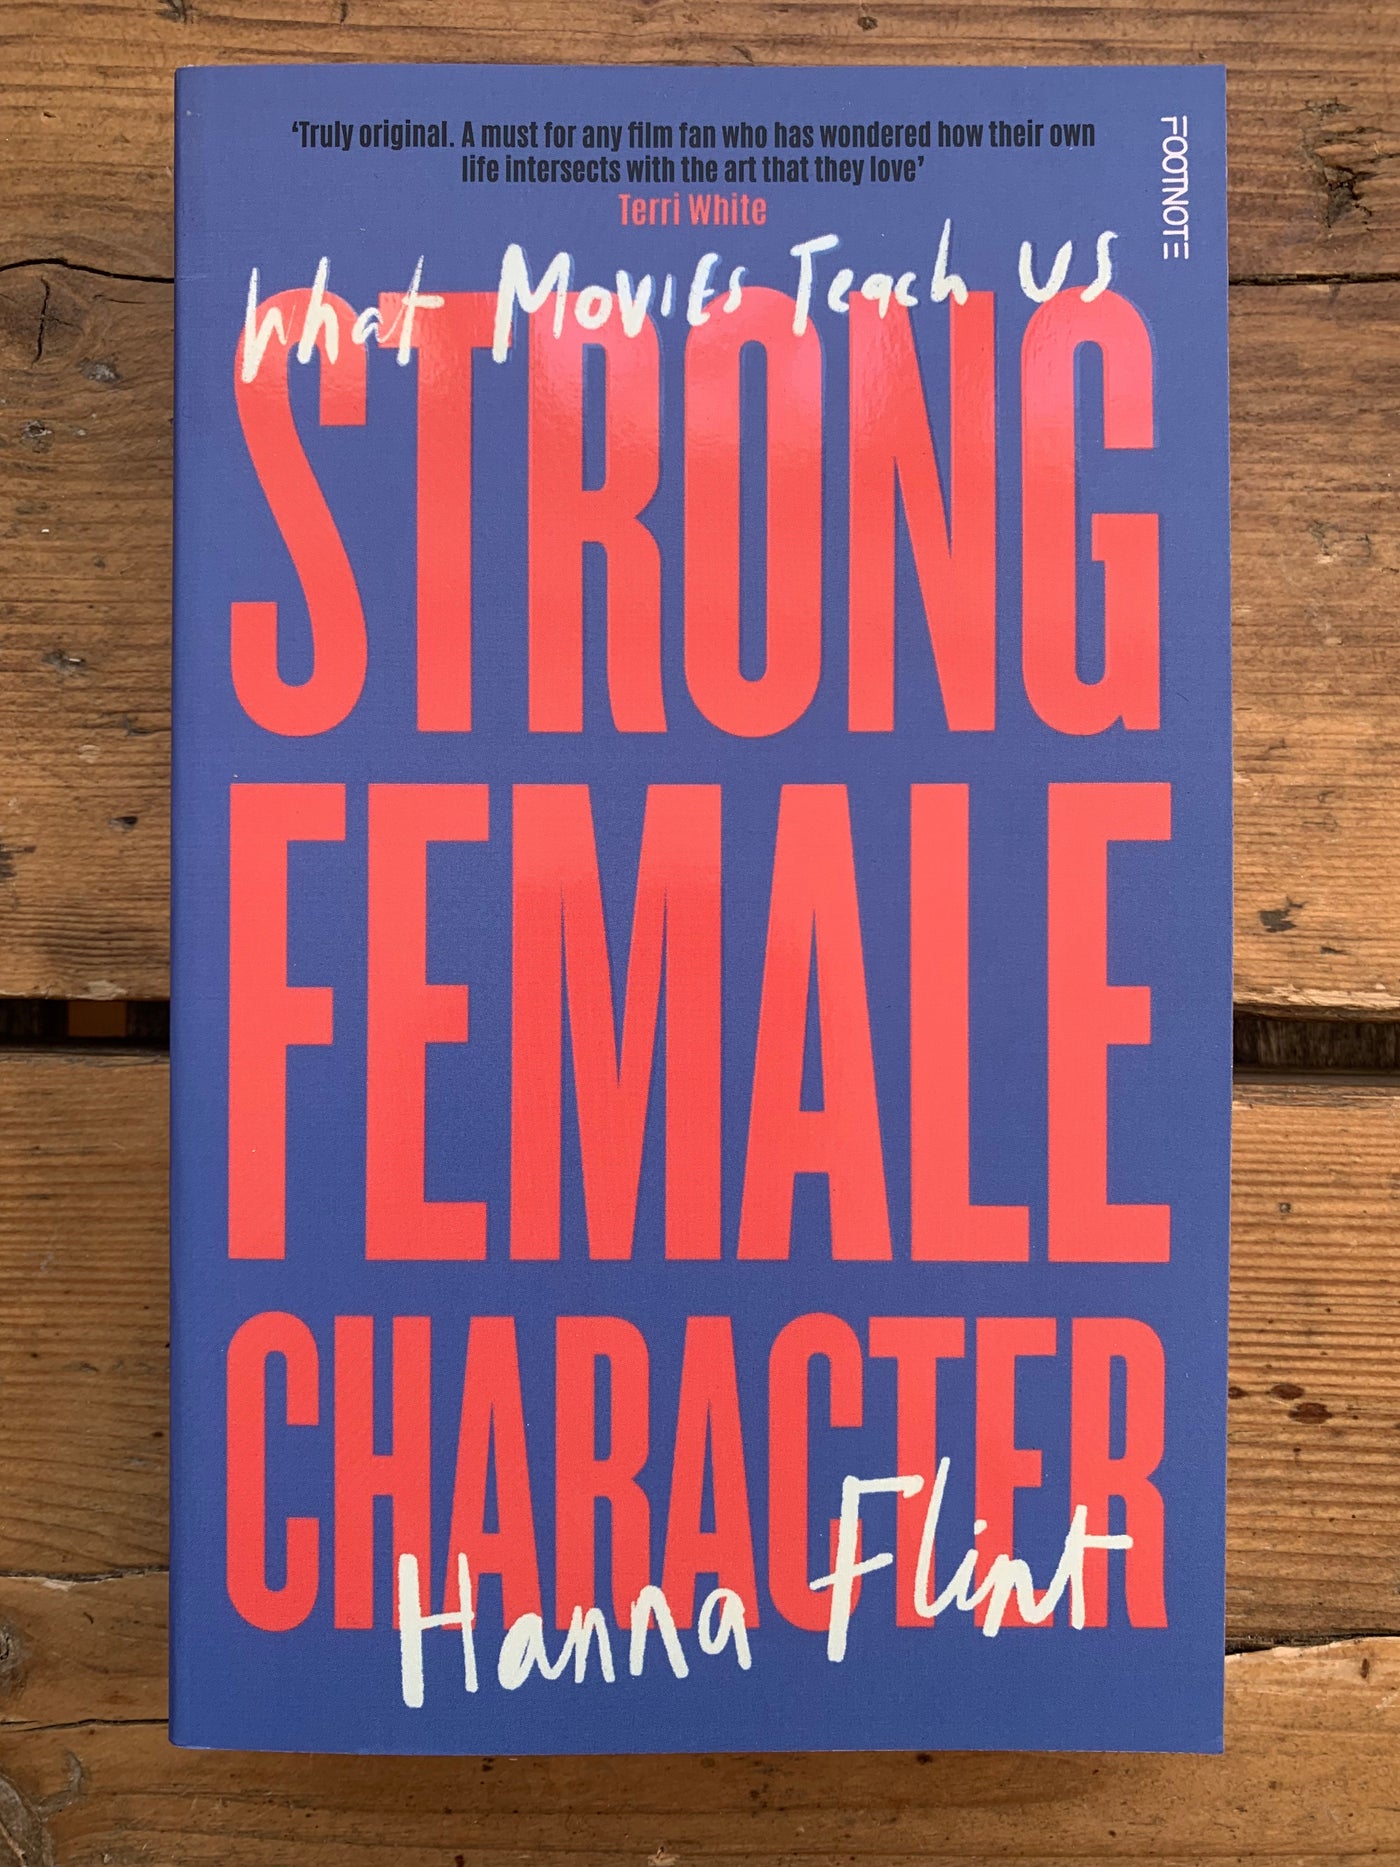 Strong Female Character - SALE